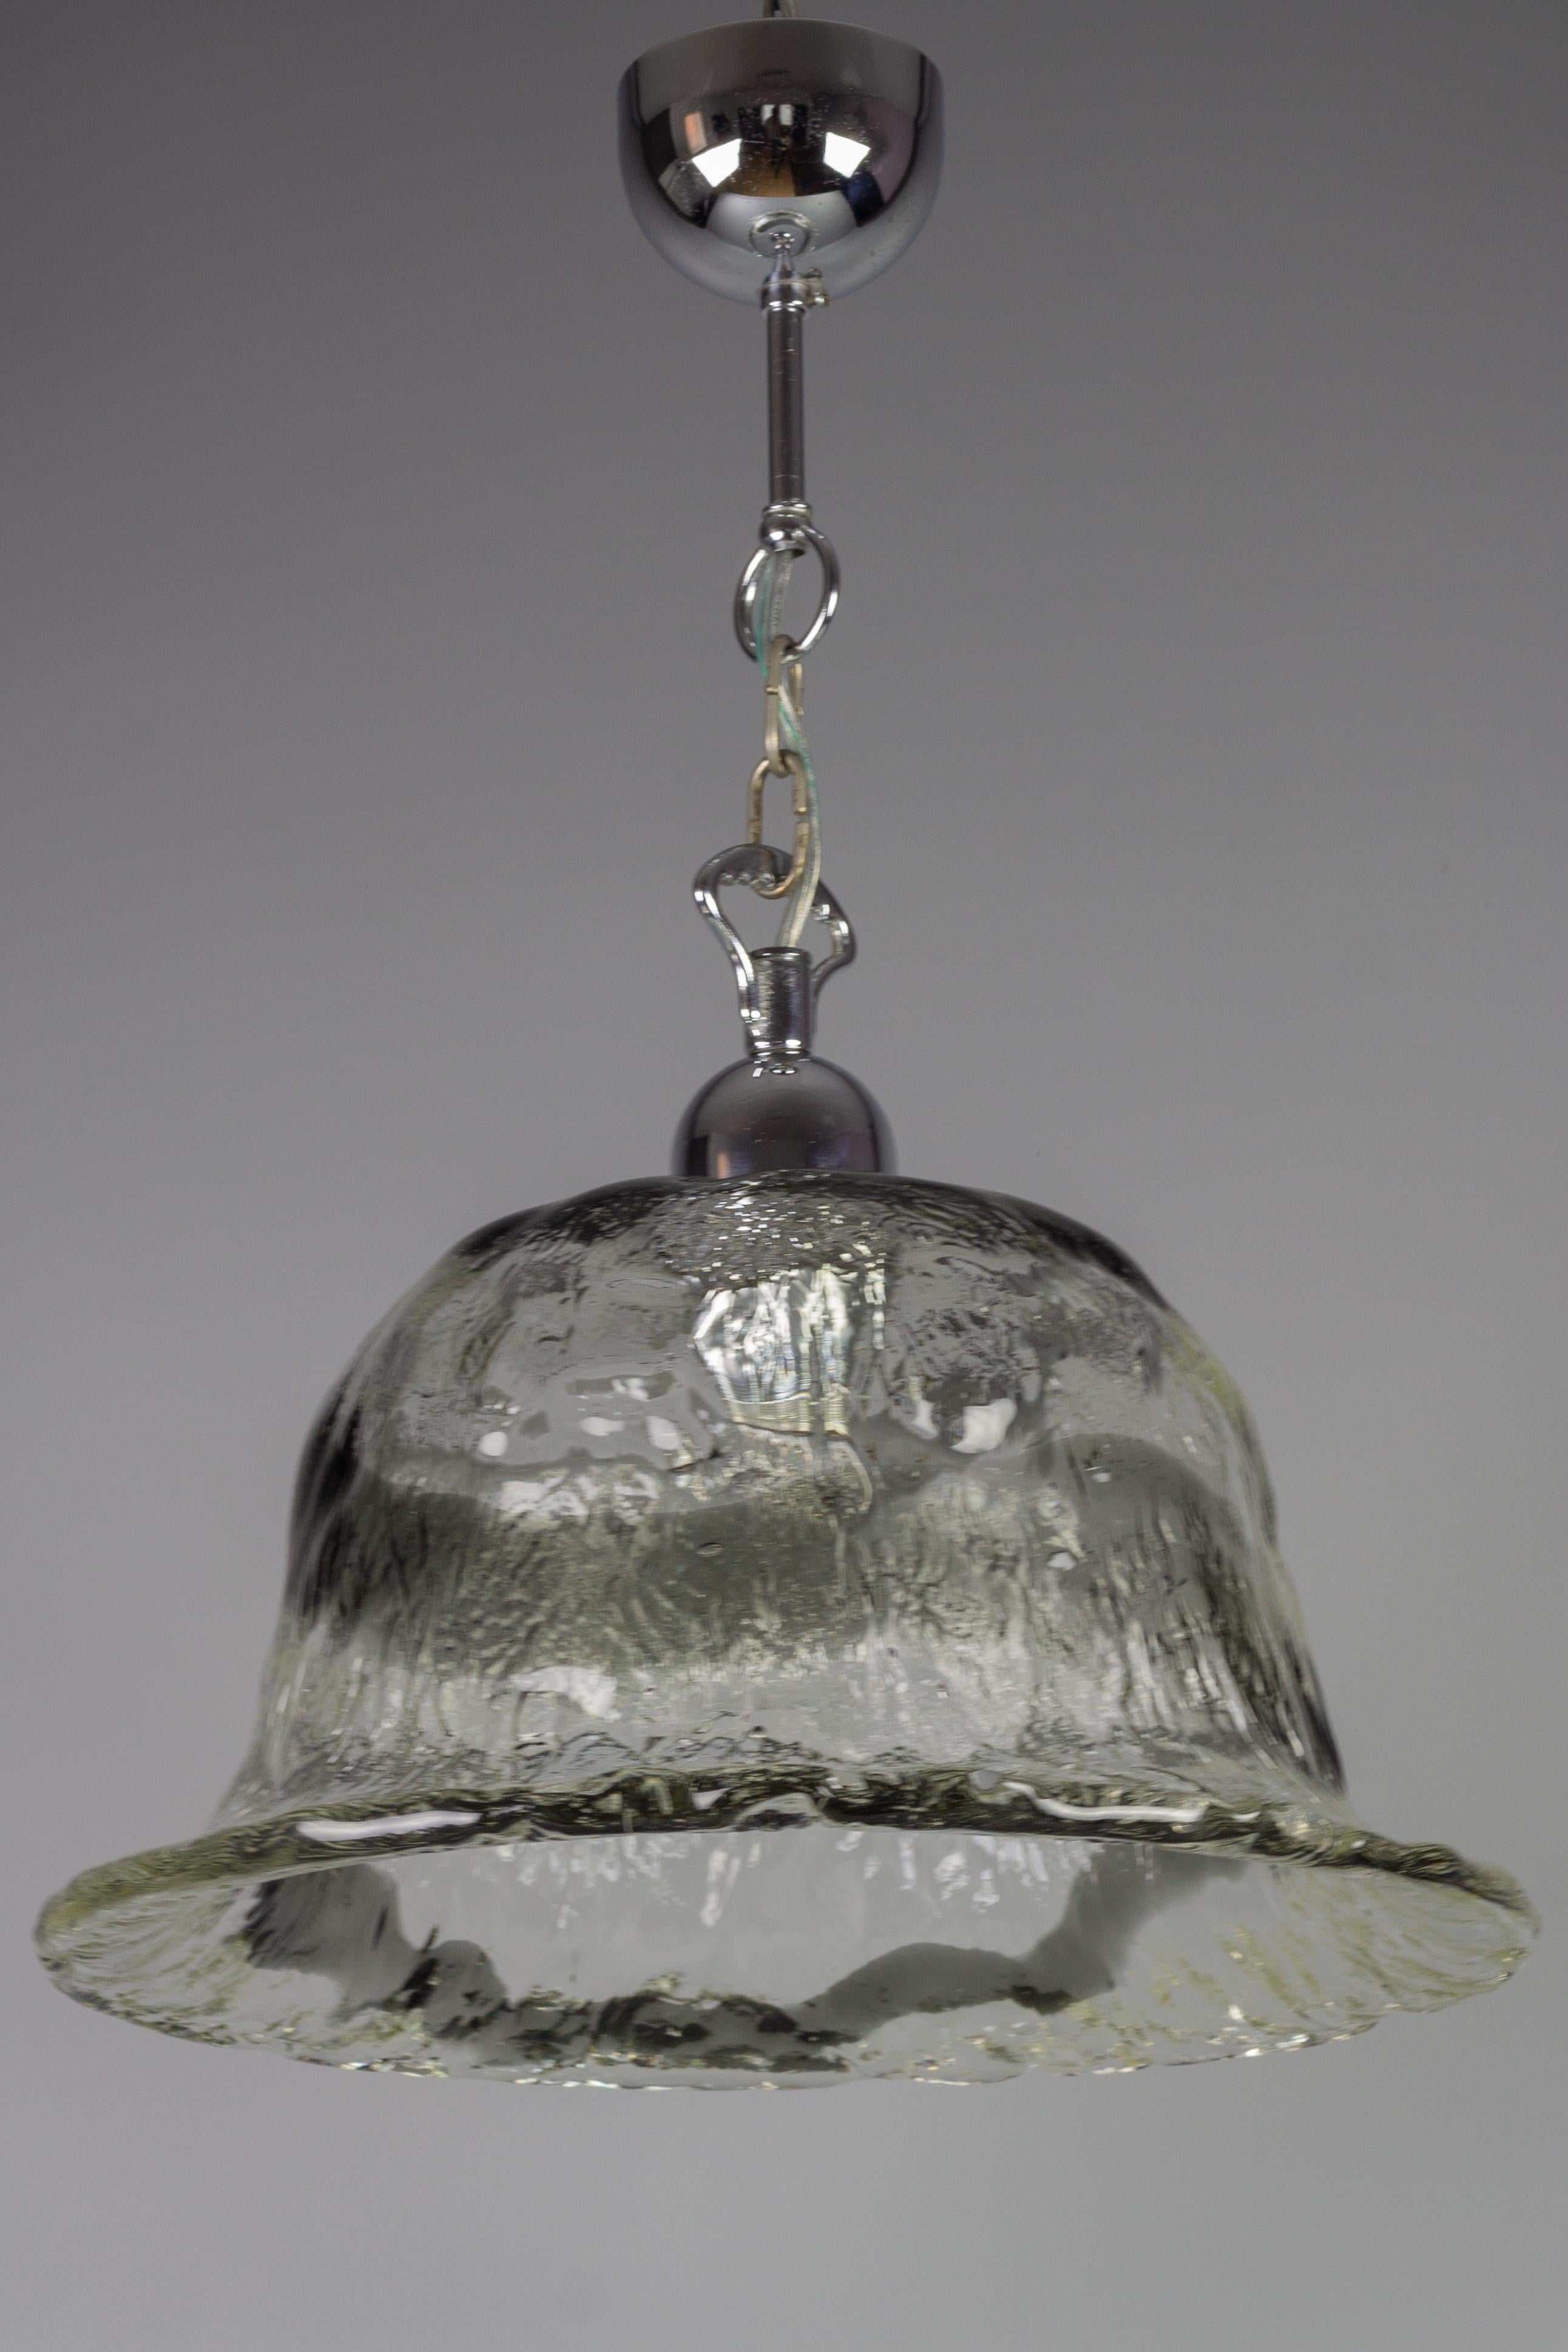 Impressive mid-century Italian Murano glass pendant light with chromed metal fitting. The beautiful thick clear and slightly gray smoked tone glass shade features a decorative blurry gray spiral-shaped line. Made in Italy in the 1970s, most probably